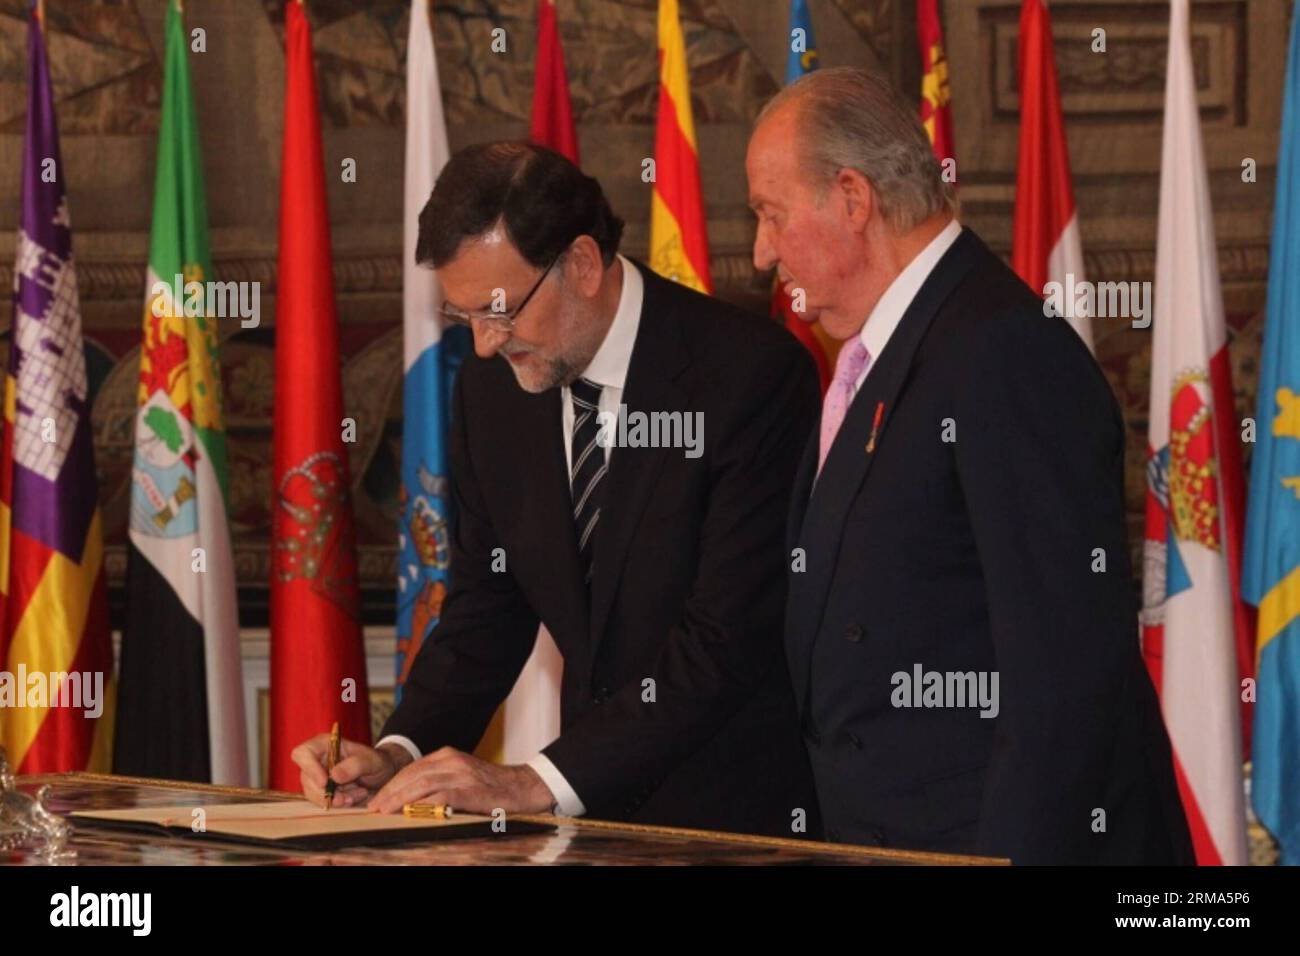 Spain s Prime Minister Mariano Rajoy (L), with the King Juan Carlos I de Borbon of Spain aside, signs the law on the king s abdication at the Royal Palace of Madrid in Madrid, June 18, 2014. The King signed on Wednesday the law on his abdication in order to give the crown to his son Felipe de Borbon, who will be King of Spain at Wednesday midnight. (Xinhua) SPAIN-MADRID-KING-ABDICATION BILL-SIGNMENT PUBLICATIONxNOTxINxCHN   Spain S Prime Ministers Mariano Rajoy l With The King Juan Carlos I de Borbon of Spain ASIDE Signs The Law ON The King S abdication AT The Royal Palace of Madrid in Madrid Stock Photo